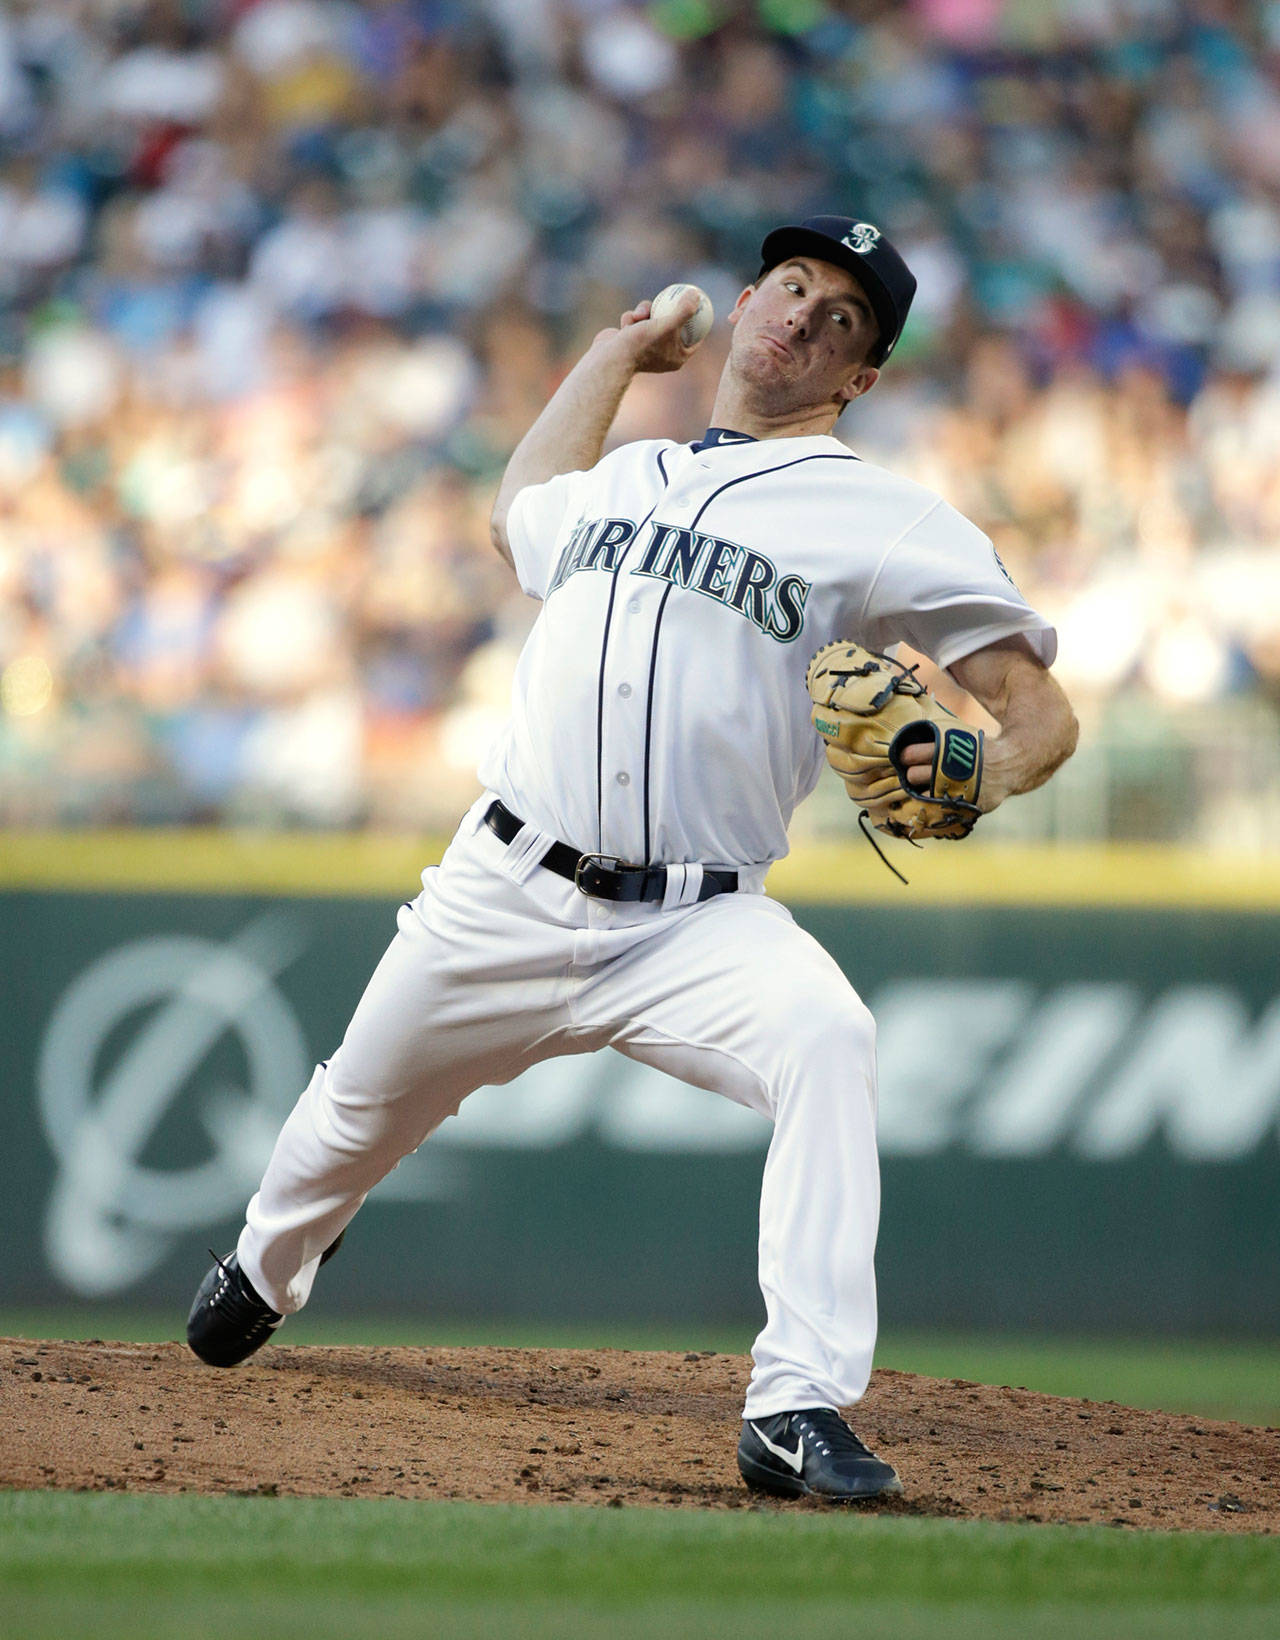 Mariners starting pitcher Andrew Moore works against the Athletics during a game July 8, 2017, in Seattle. (AP Photo/John Froschauer)